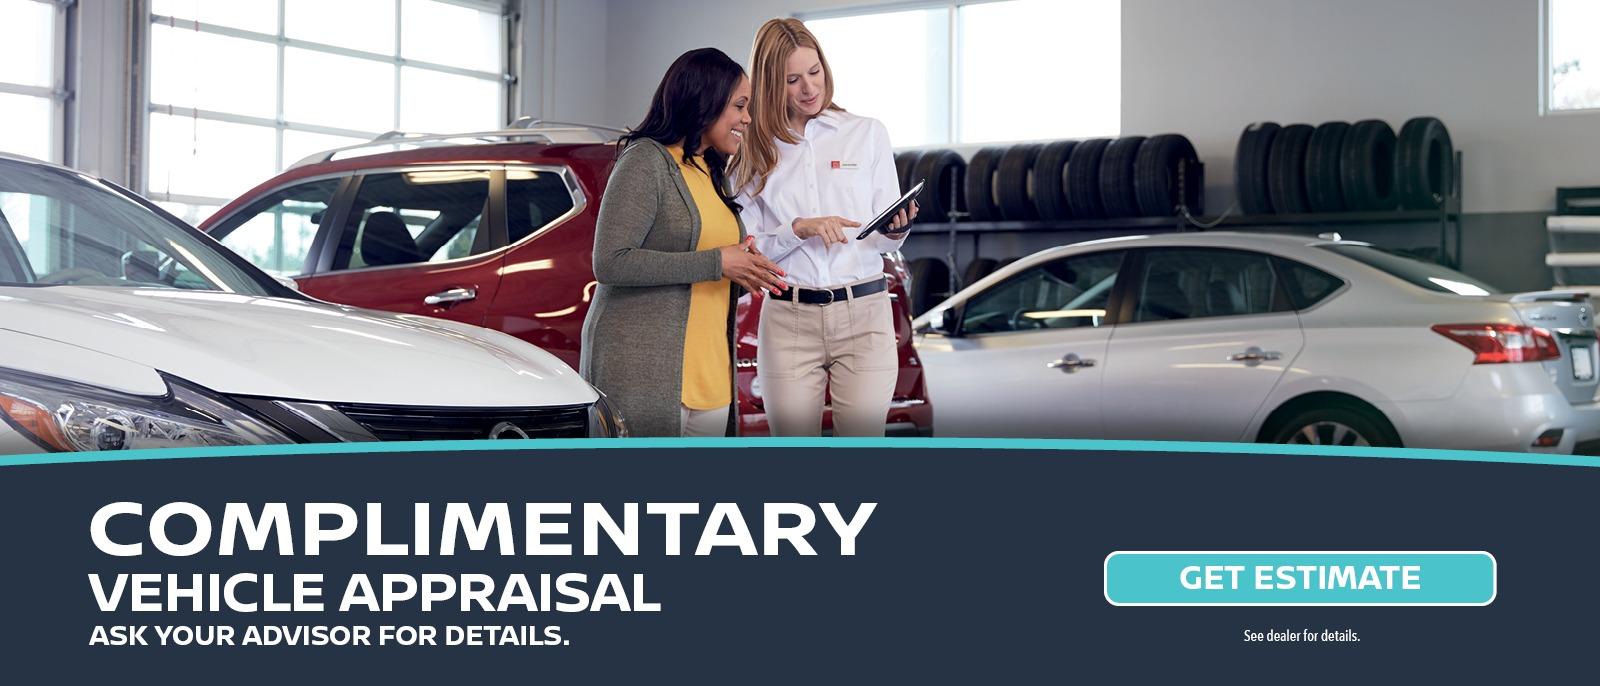 Complimentary Vehicle Appraisal